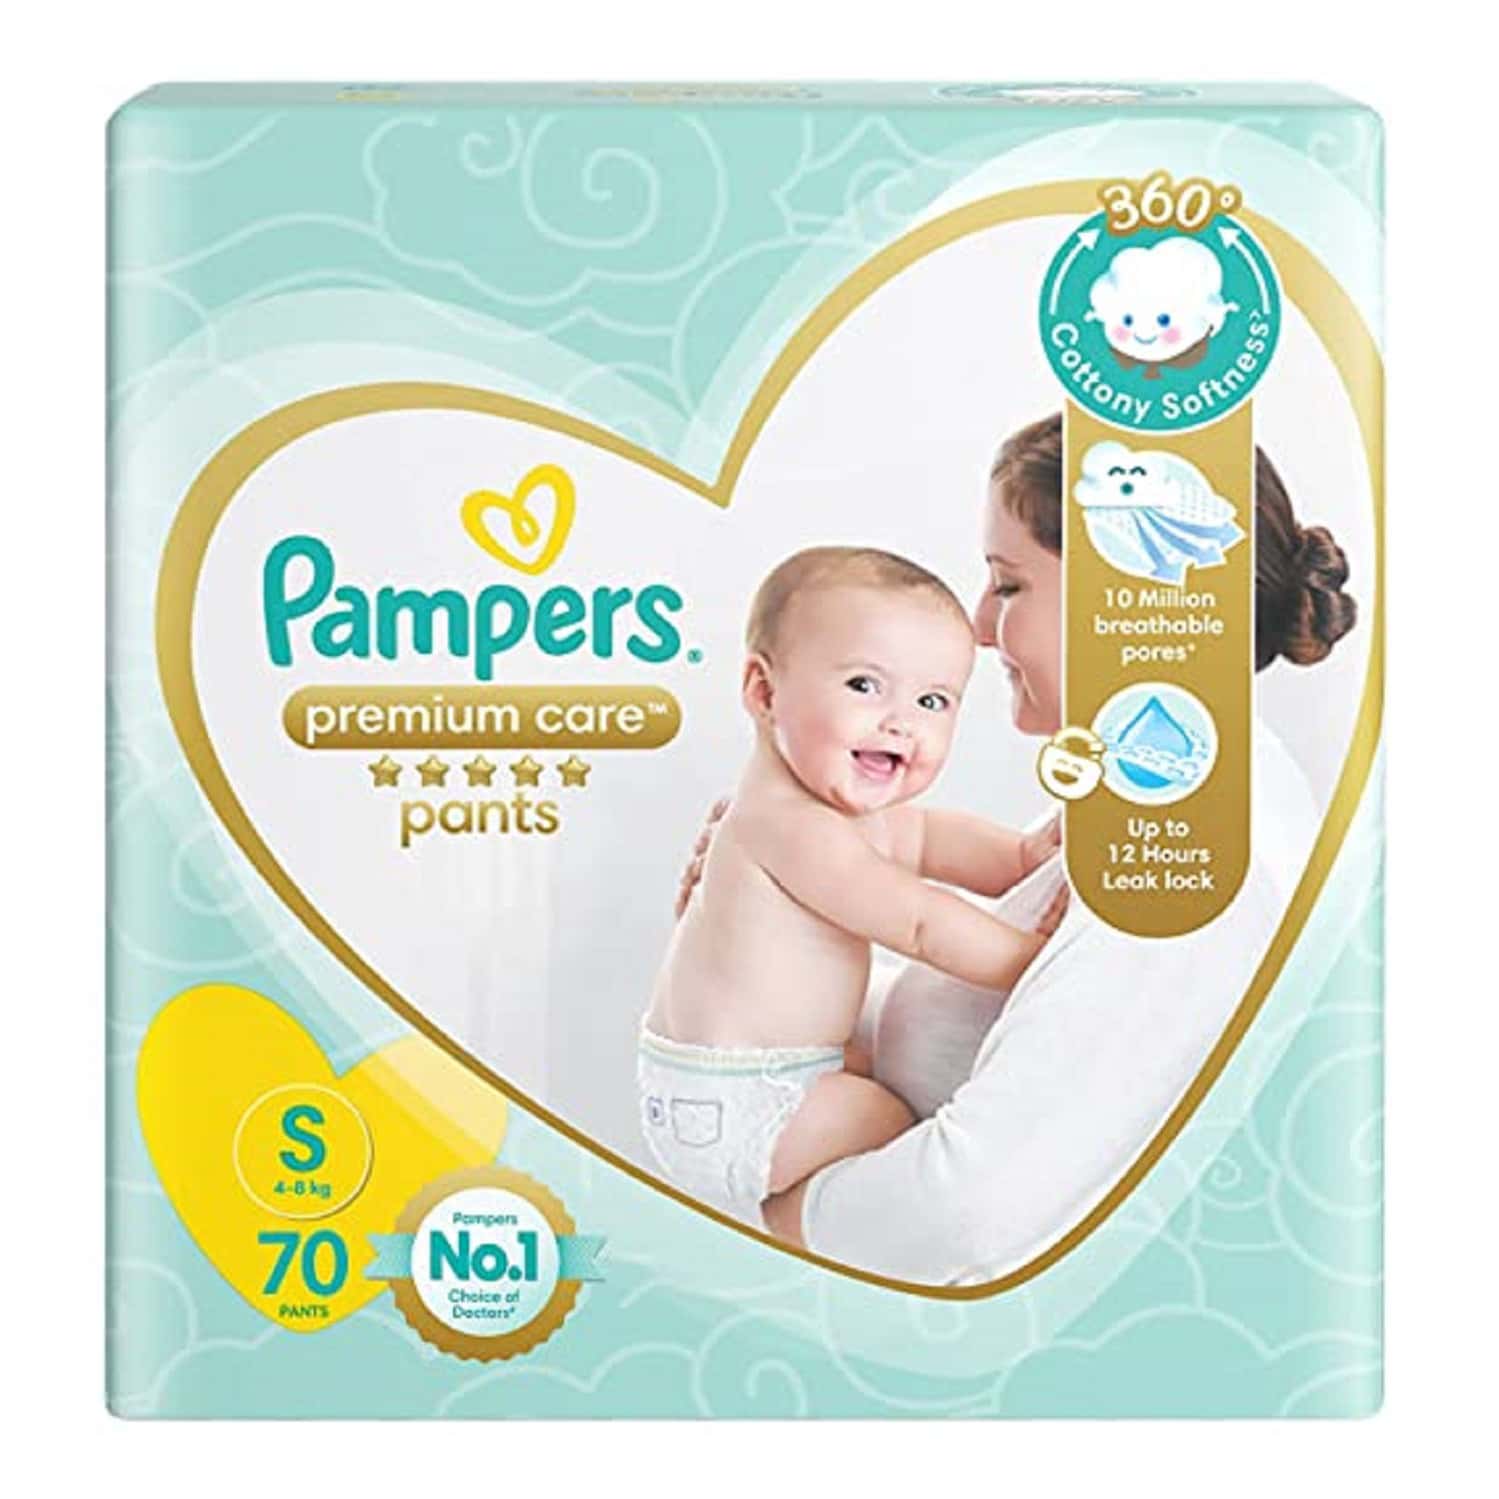 pampers active baby 4 9-14 kg ceneo